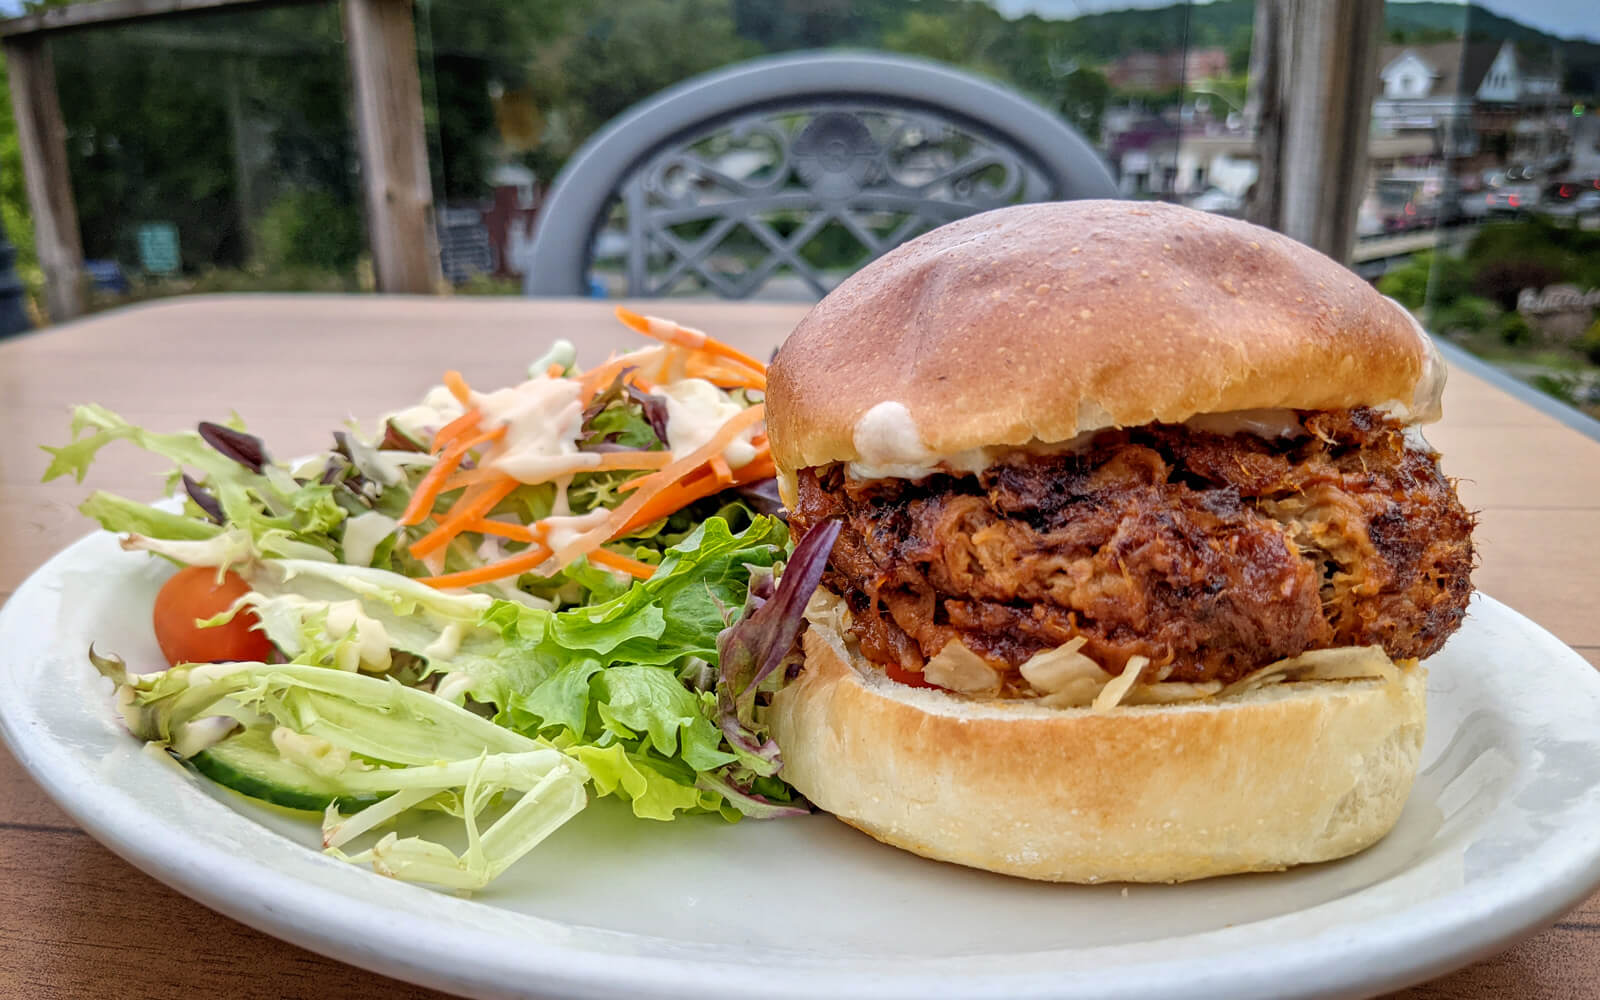 Pulled Pork Sandwich from the Granite Restaurant with a Side Salad :: I've Been Bit! Travel Blog